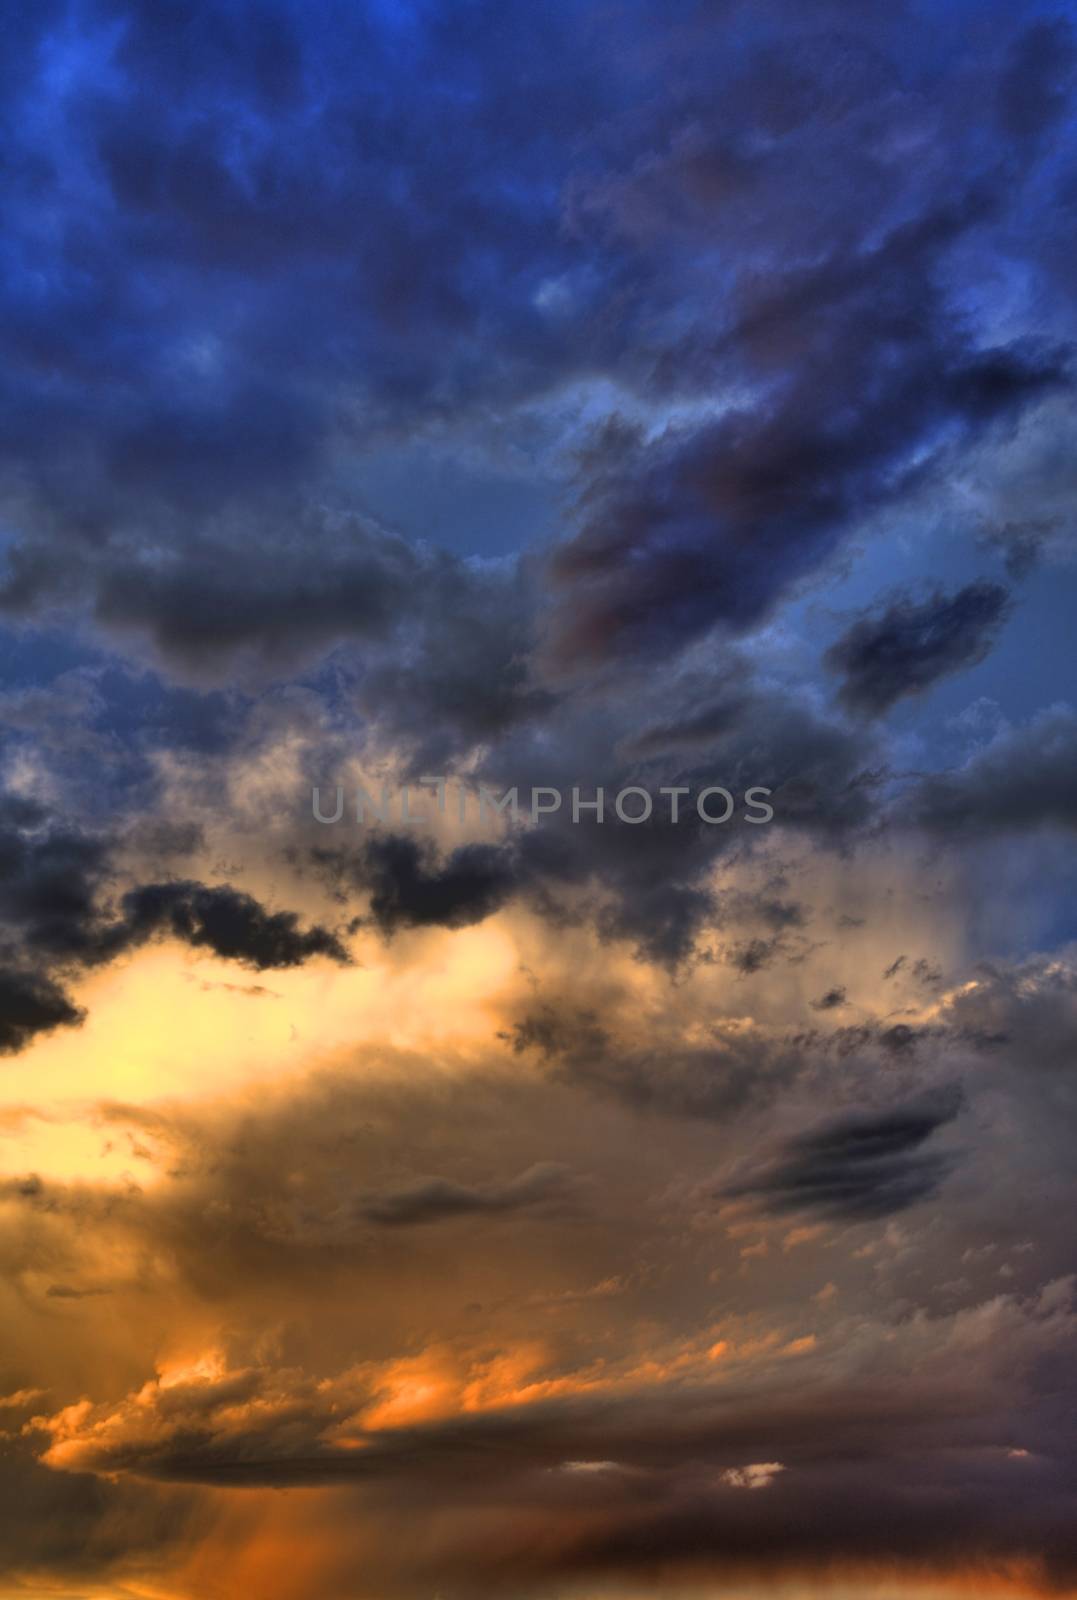 <span style=\"font-family: Arial, Helvetica, sans-serif; font-size: 11px; color: #7f7f7f; white-space: pre;\">HDR Photo - Stormy Sky. Sunset Sky</span>